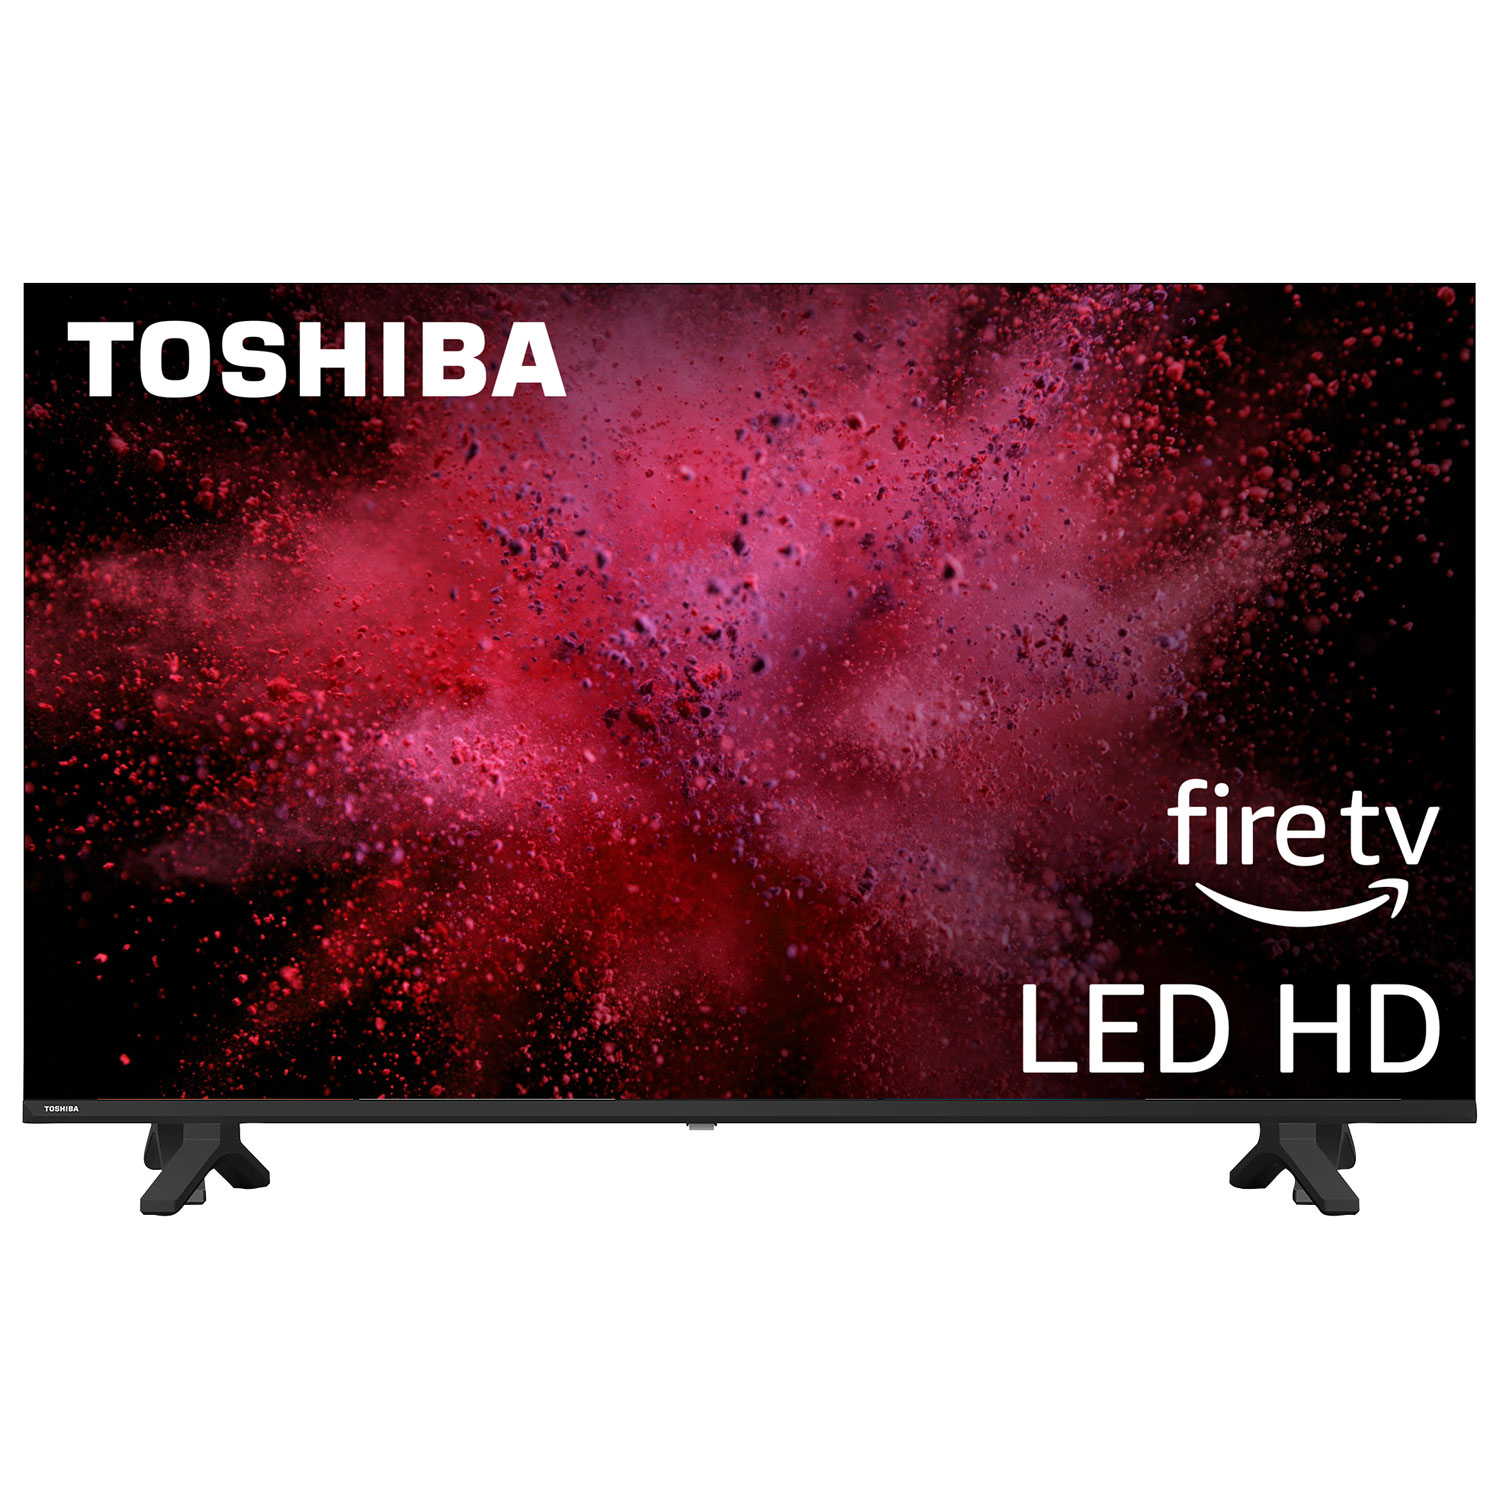 Toshiba 32" 720p HD LED Smart TV (32V35C) - Fire TV Edition - 2021 - Only at Best Buy